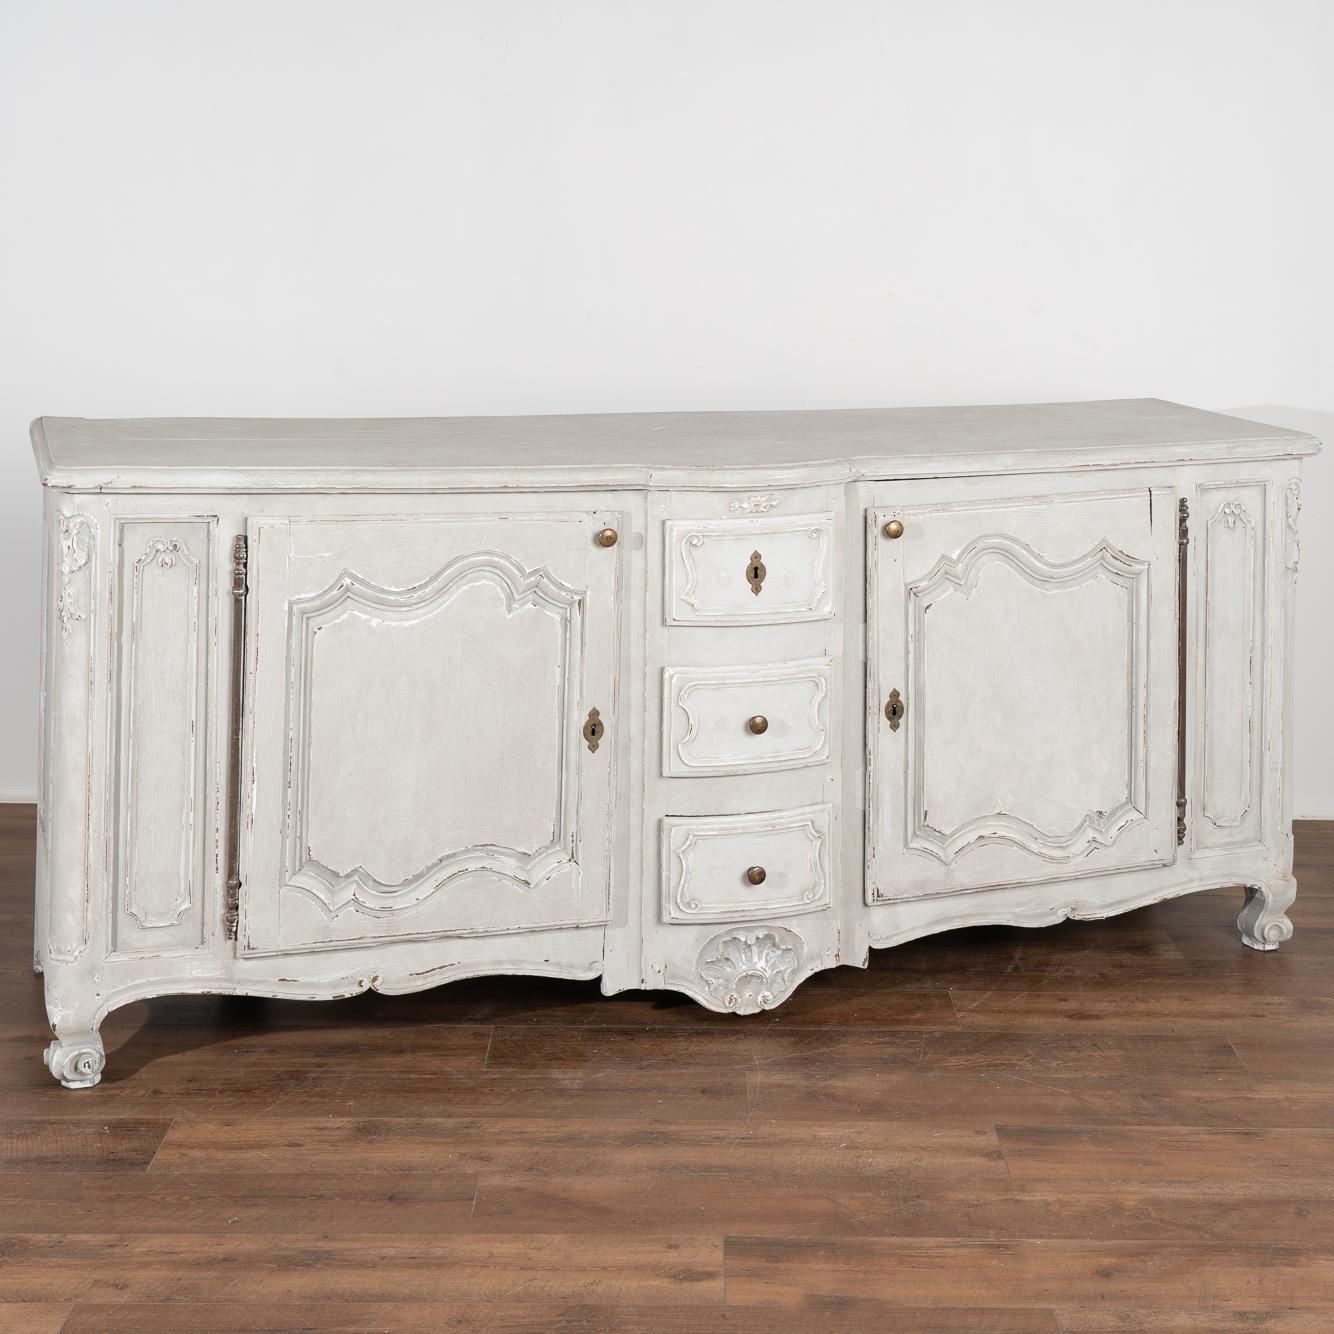 Large French oak sideboard with traditional carved panel details. At 7.5' long, this will serve as an impressive buffet resting on carved feet.
Please enlarge photos to appreciate the newer professionally applied and layered gray painted